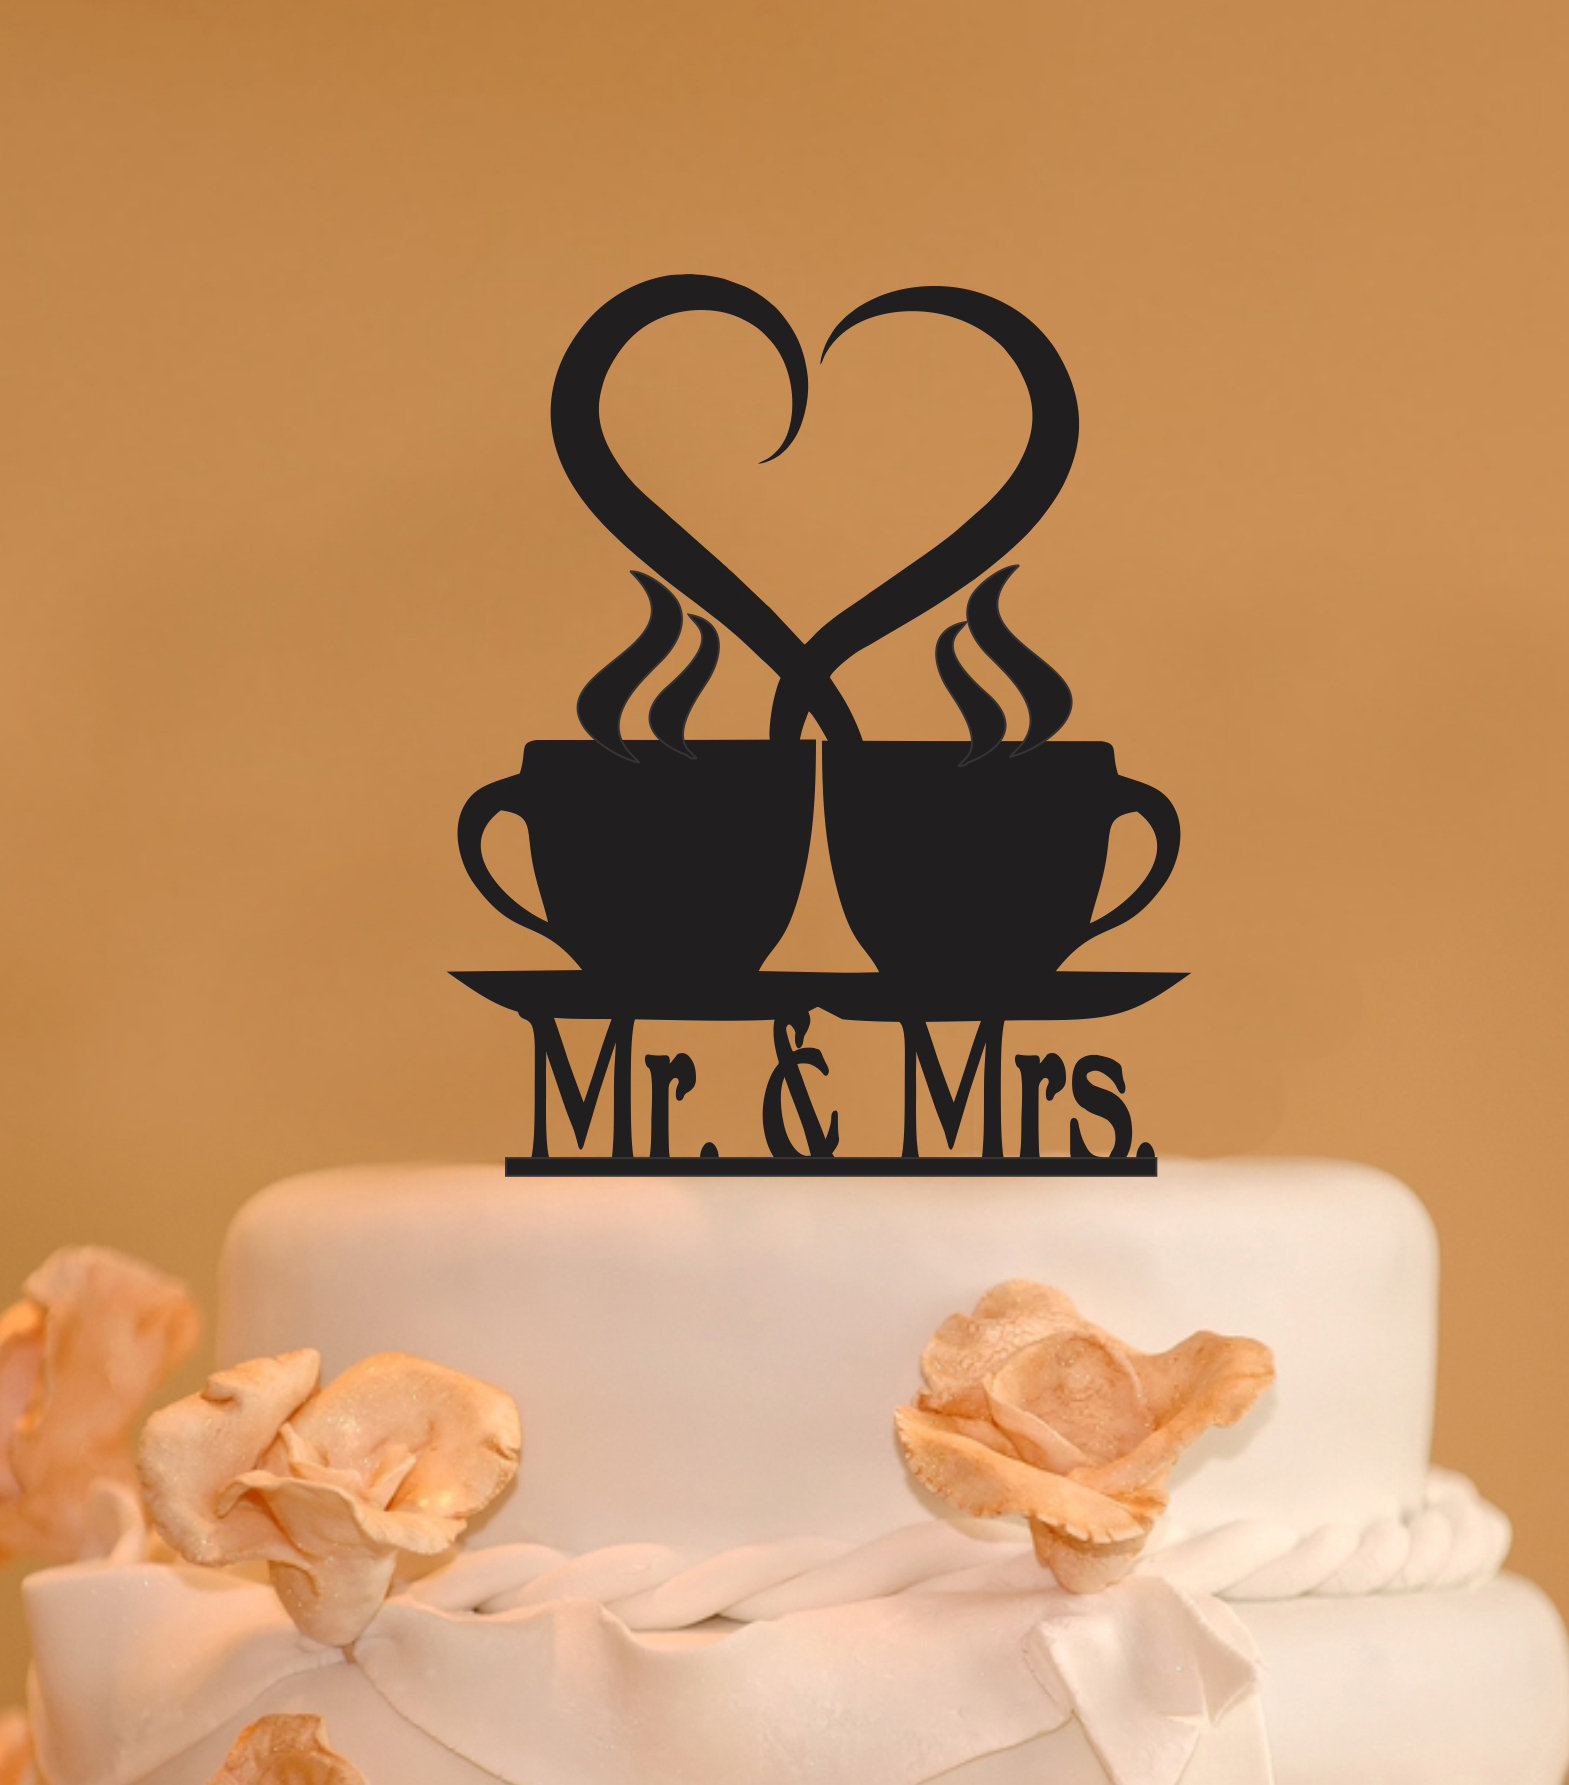 Mr. and Mrs. coffee cups with heart Wedding Cake Topper- coffee cups steam  heart Mr. and Mrs. cake topper - custom wedding cake topper